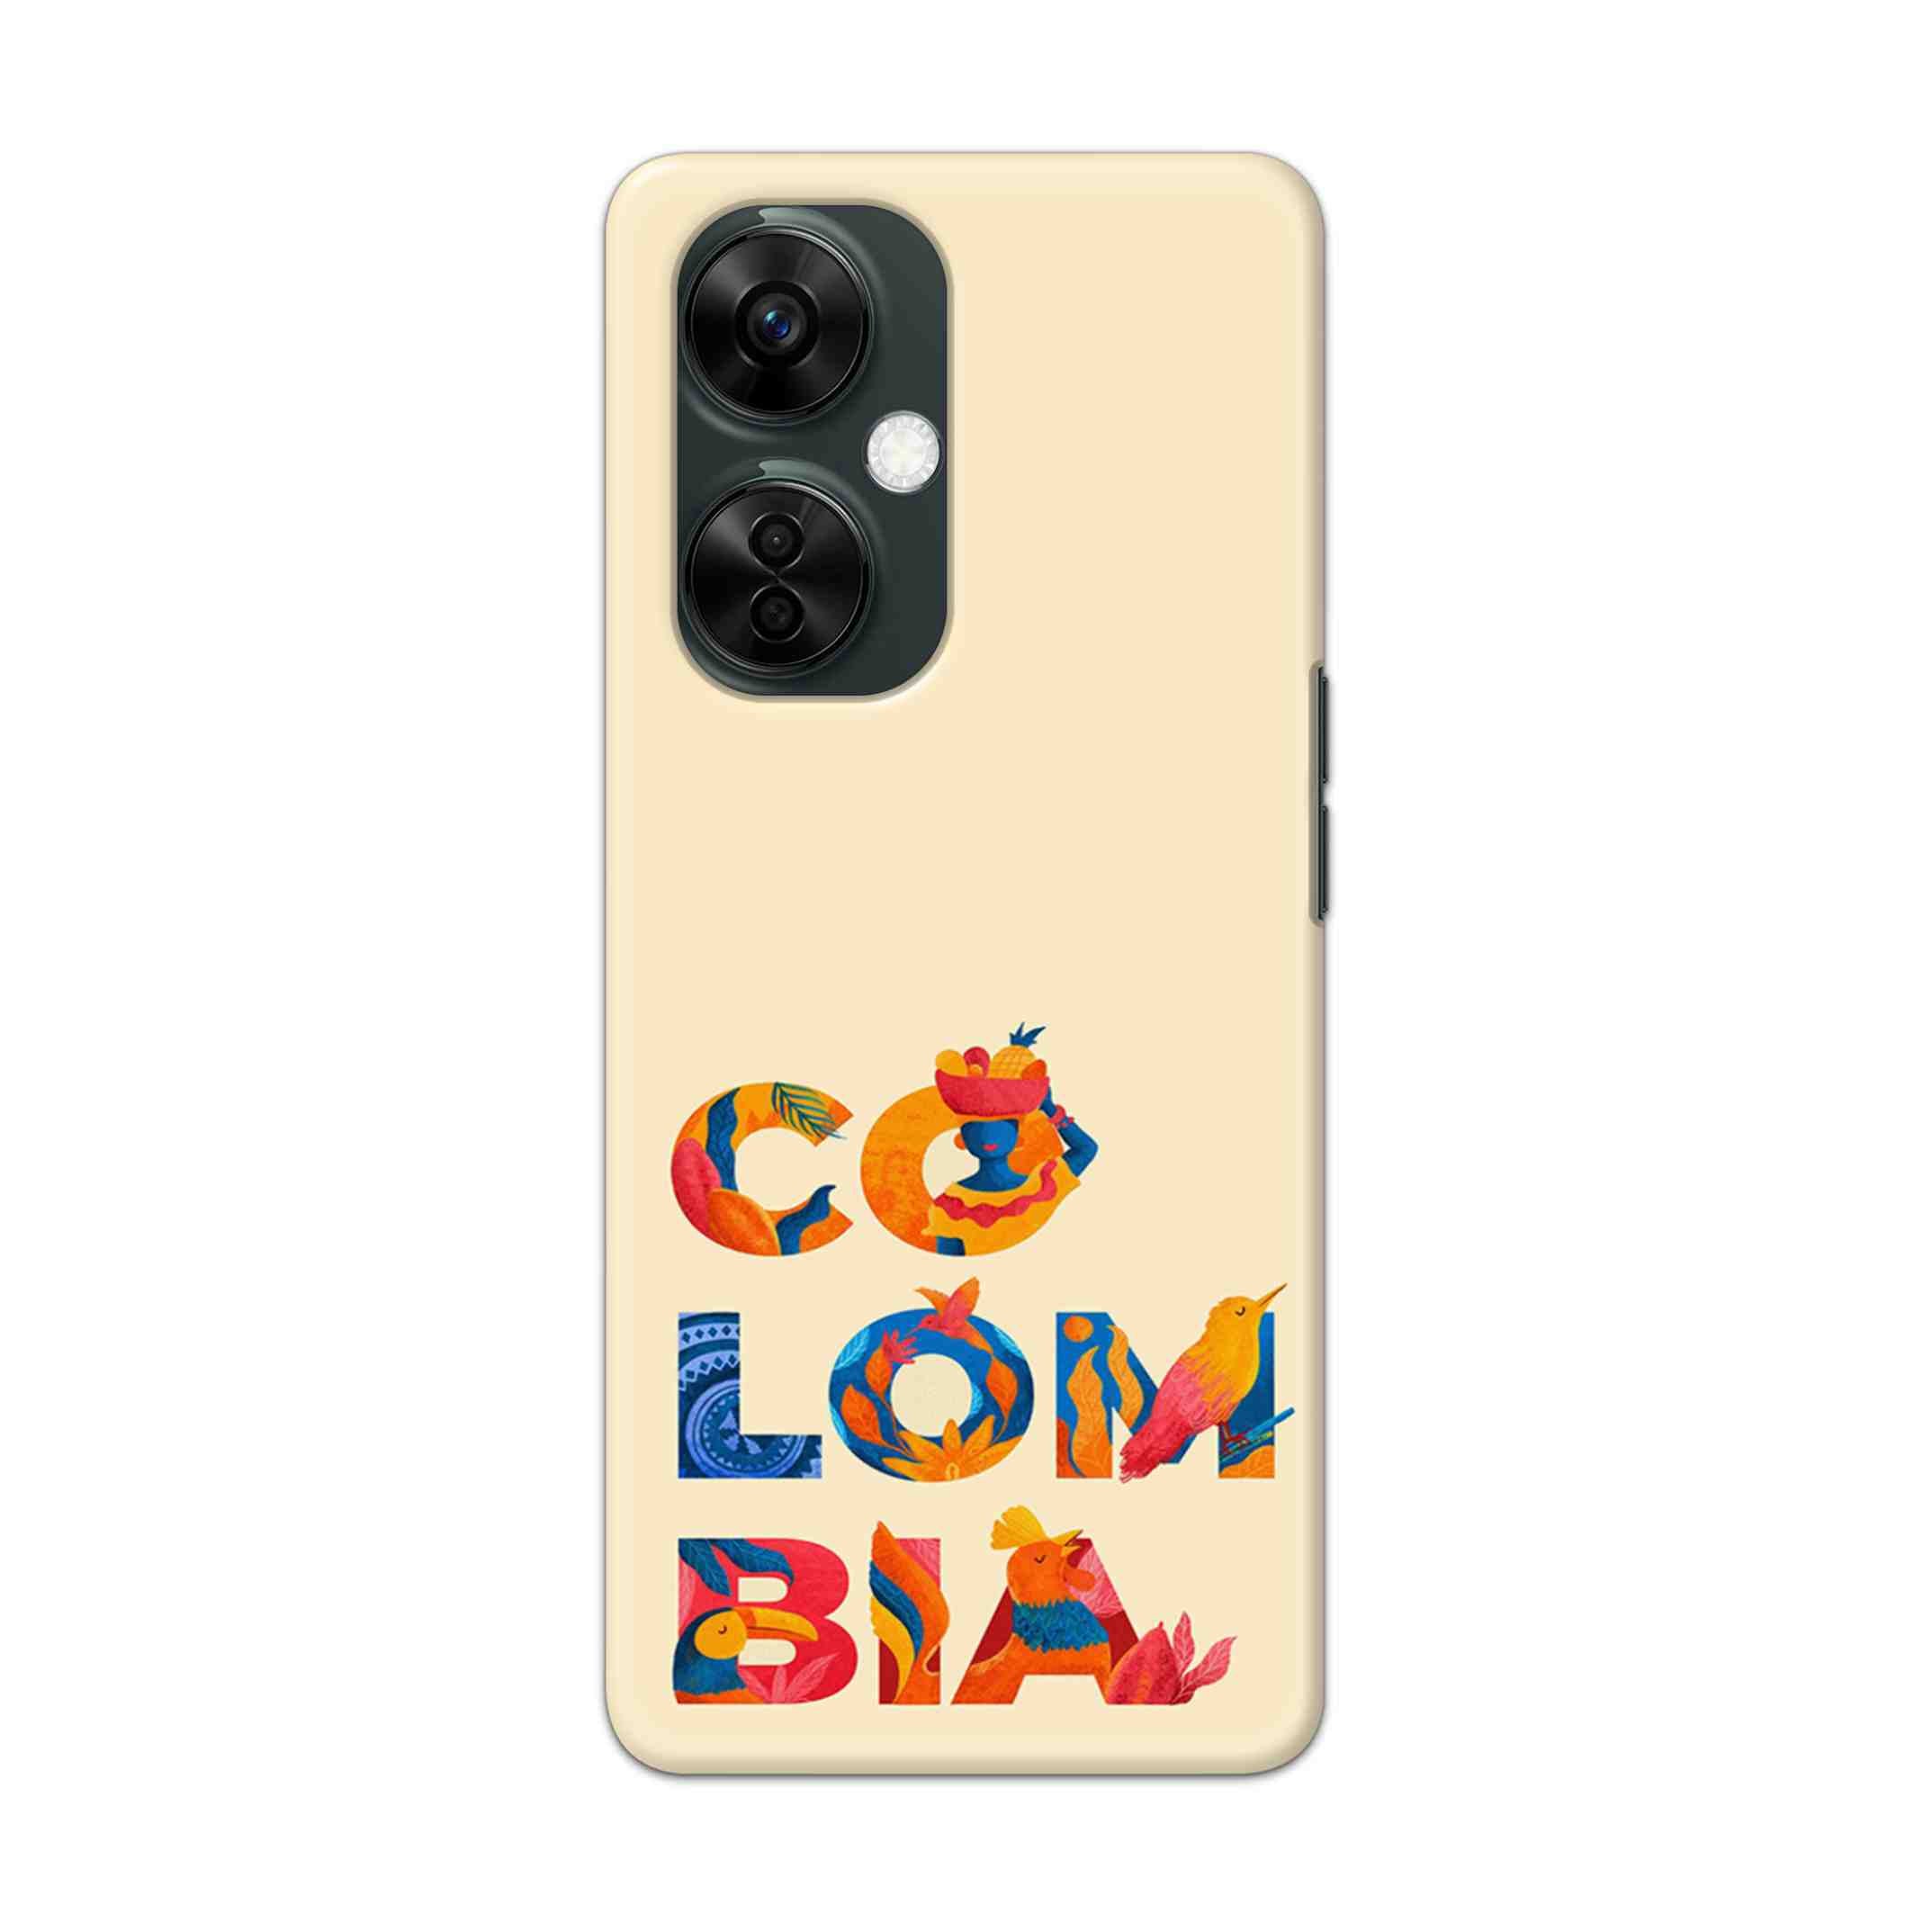 Buy Colombia Hard Back Mobile Phone Case Cover For Oneplus Nord CE 3 Lite Online